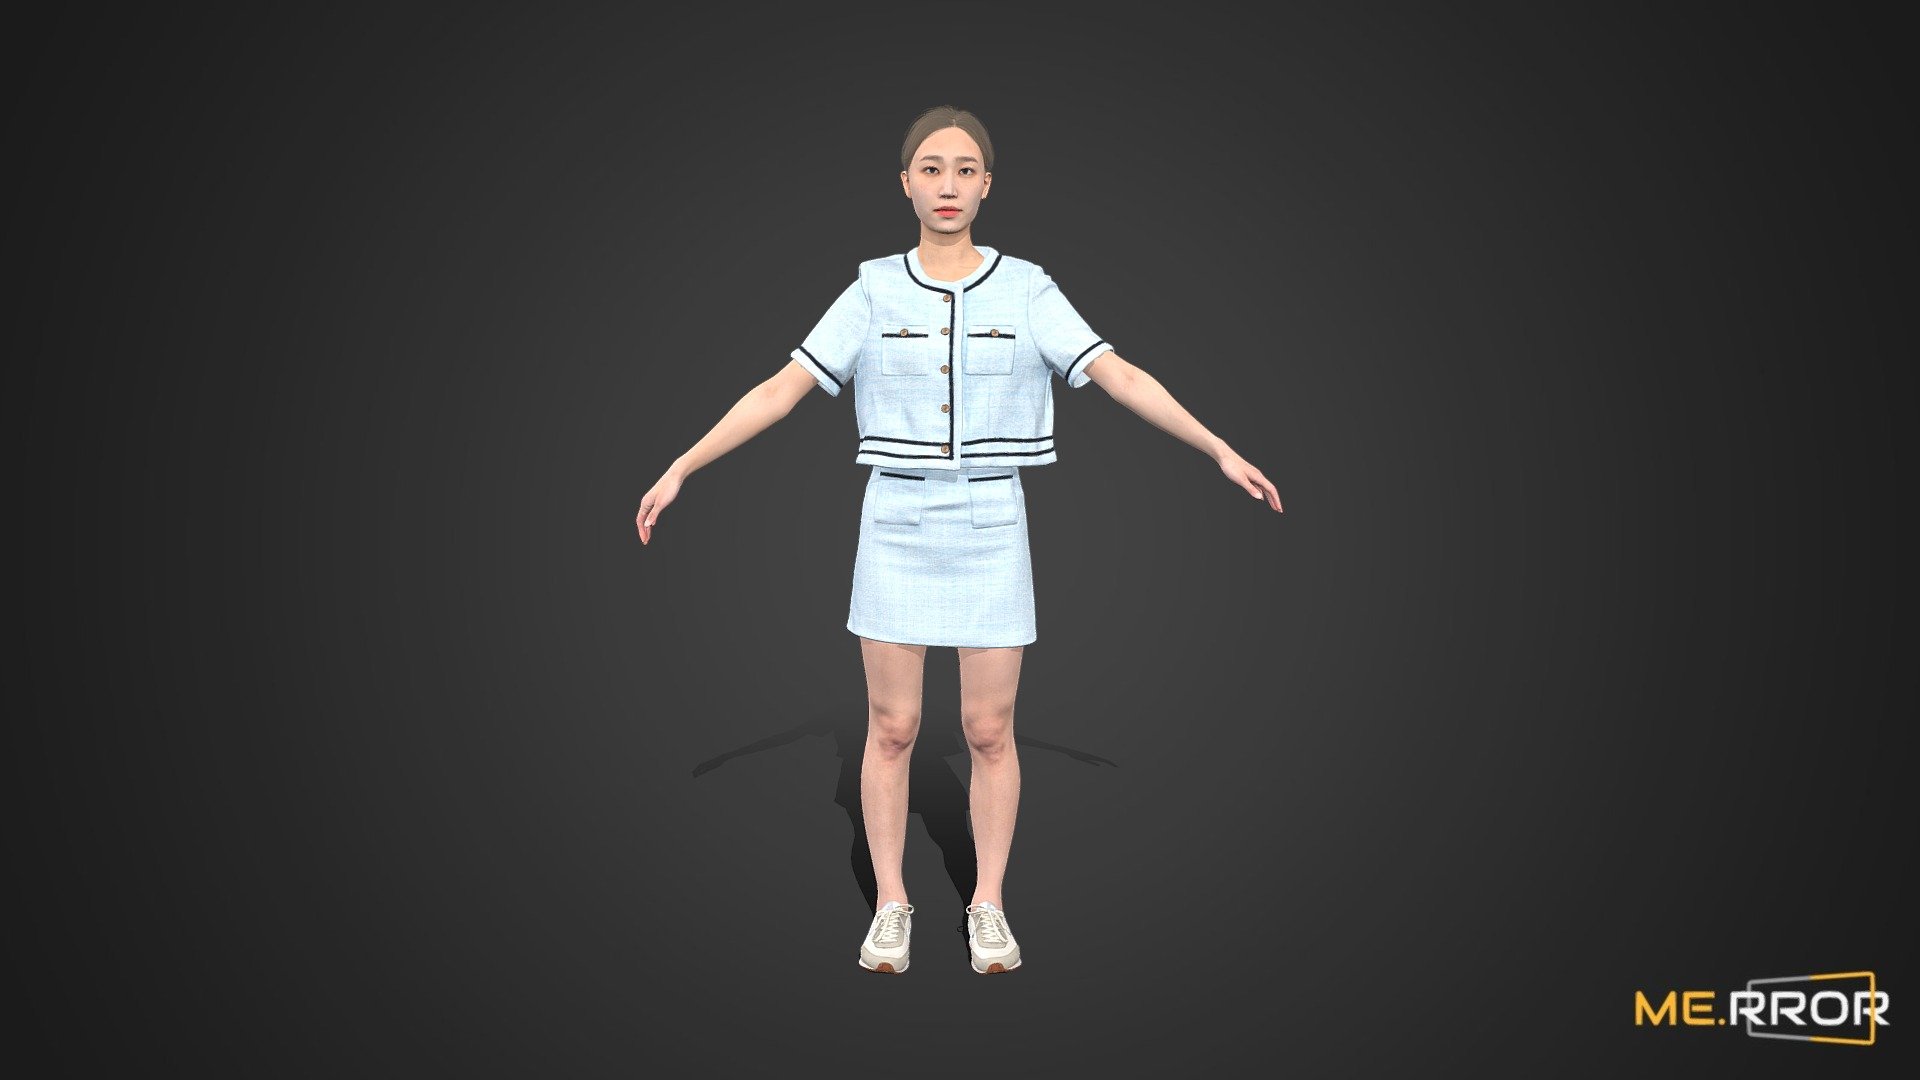 ME.RROR


From 3D models of Asian individuals to a fresh selection of free assets available each month - explore a richer diversity of photorealistic 3D assets at the ME.RROR asset store!

https://me-rror.com/store




[Model Info]




Model Formats : FBX, MAX

Texture Maps (8K) : Diffuse, Normal, Opacity

If you encounter any problems using this model, please feel free to contact us. We'd be glad to help you.



[About ME.RROR]

Step into the future with ME.RROR, South Korea's leading 3D specialist. Bespoke creations are not just possible; they are our specialty.

Service areas:




3D scanning

3D modeling

Virtual human creation

Inquiries: https://merror.channel.io/lounge - [Game-ready] Asian Woman Scan A-Posed 9 - Buy Royalty Free 3D model by ME.RROR (@merror) 3d model